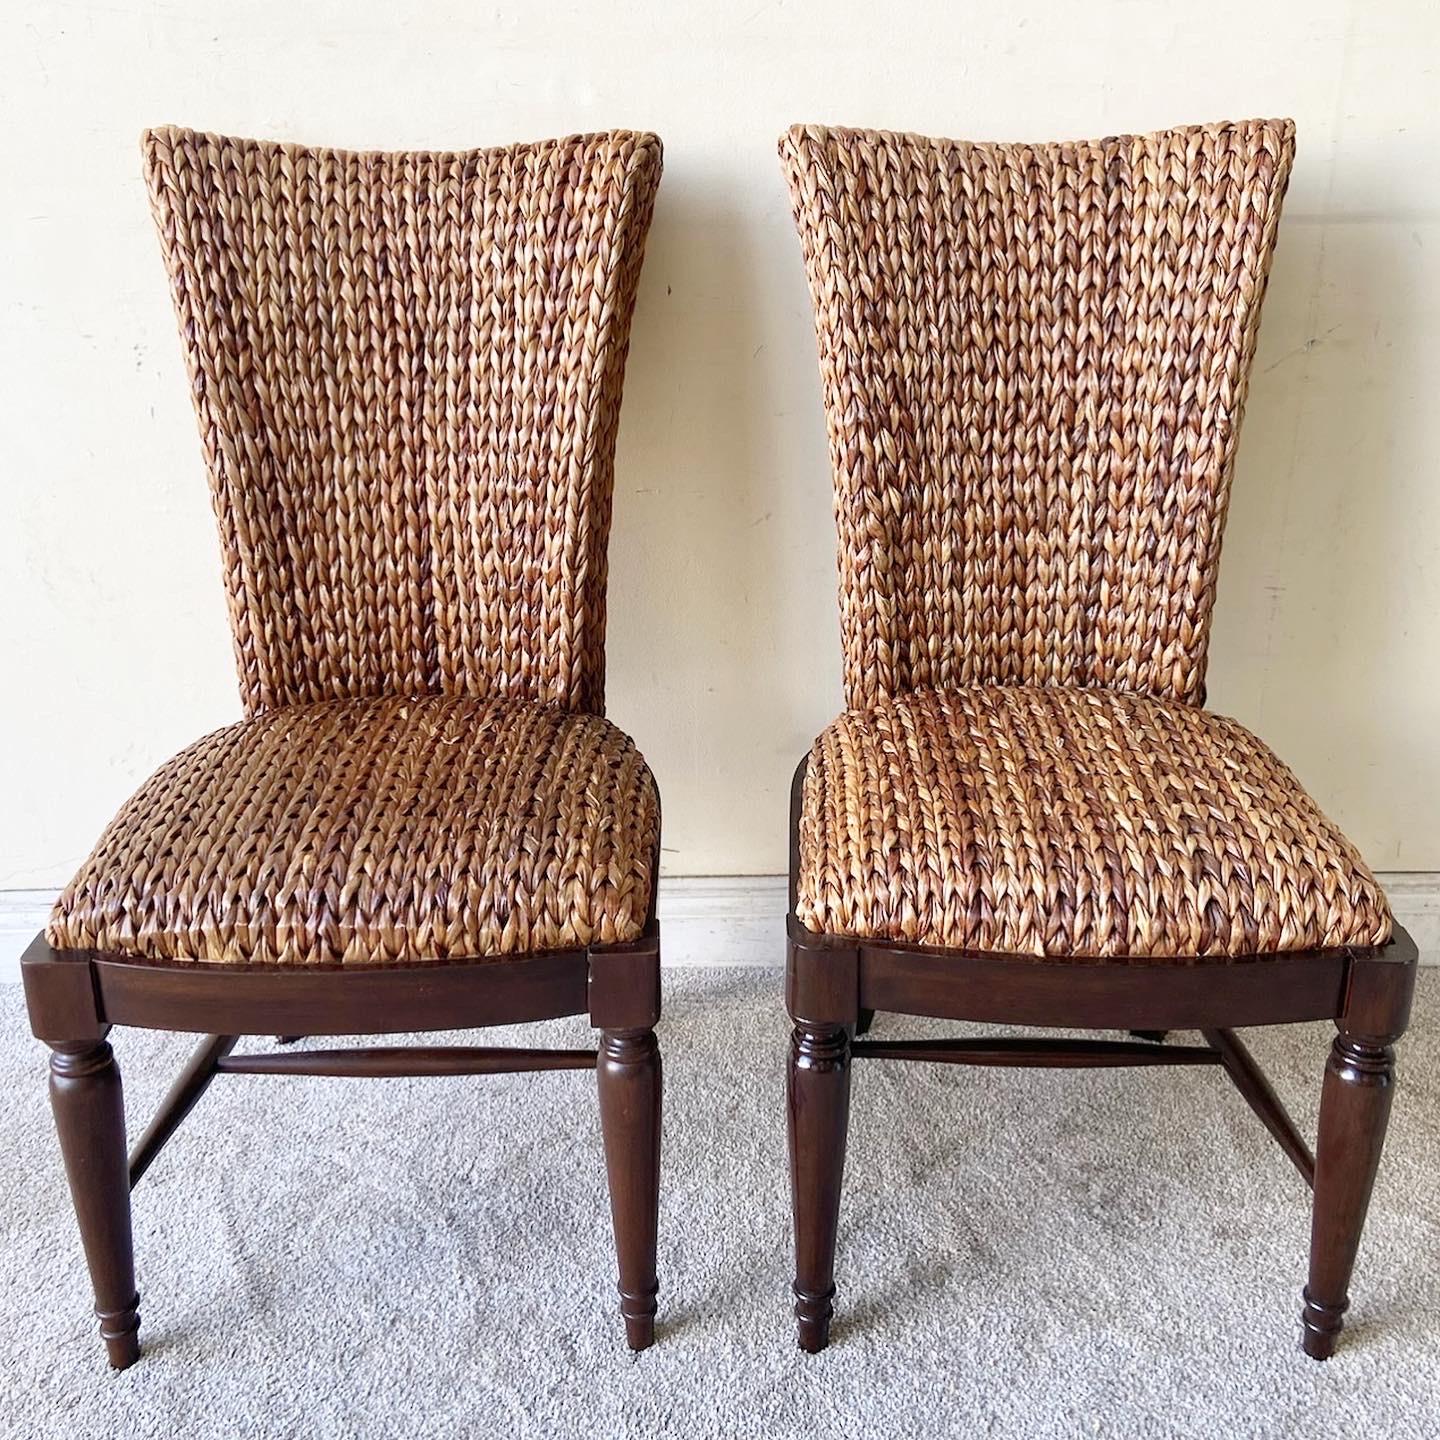 Exceptional set of 4 vintage boho chic dining chairs. Each feature a traditional wooden base with a woven sea grass back rest an seat.